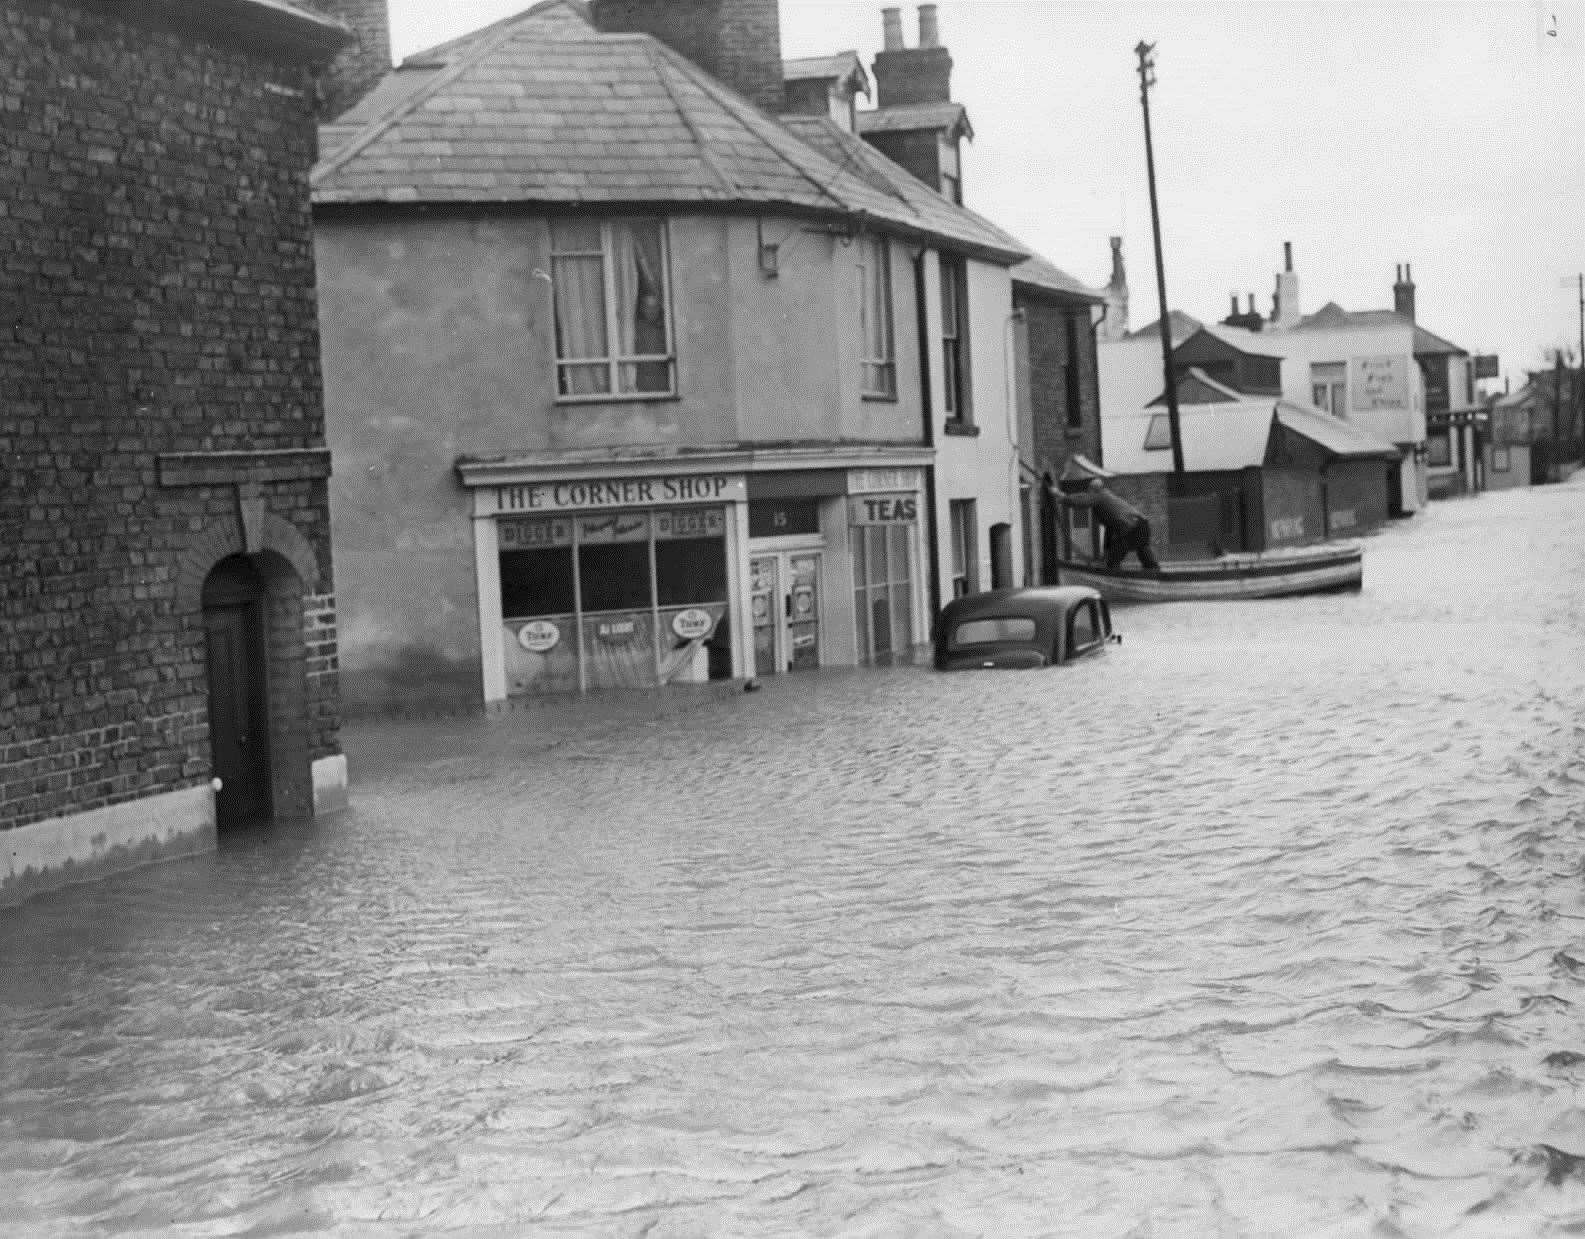 The flooded car in Island Wall, Whitstable, belonged to Betty Marchant's boss